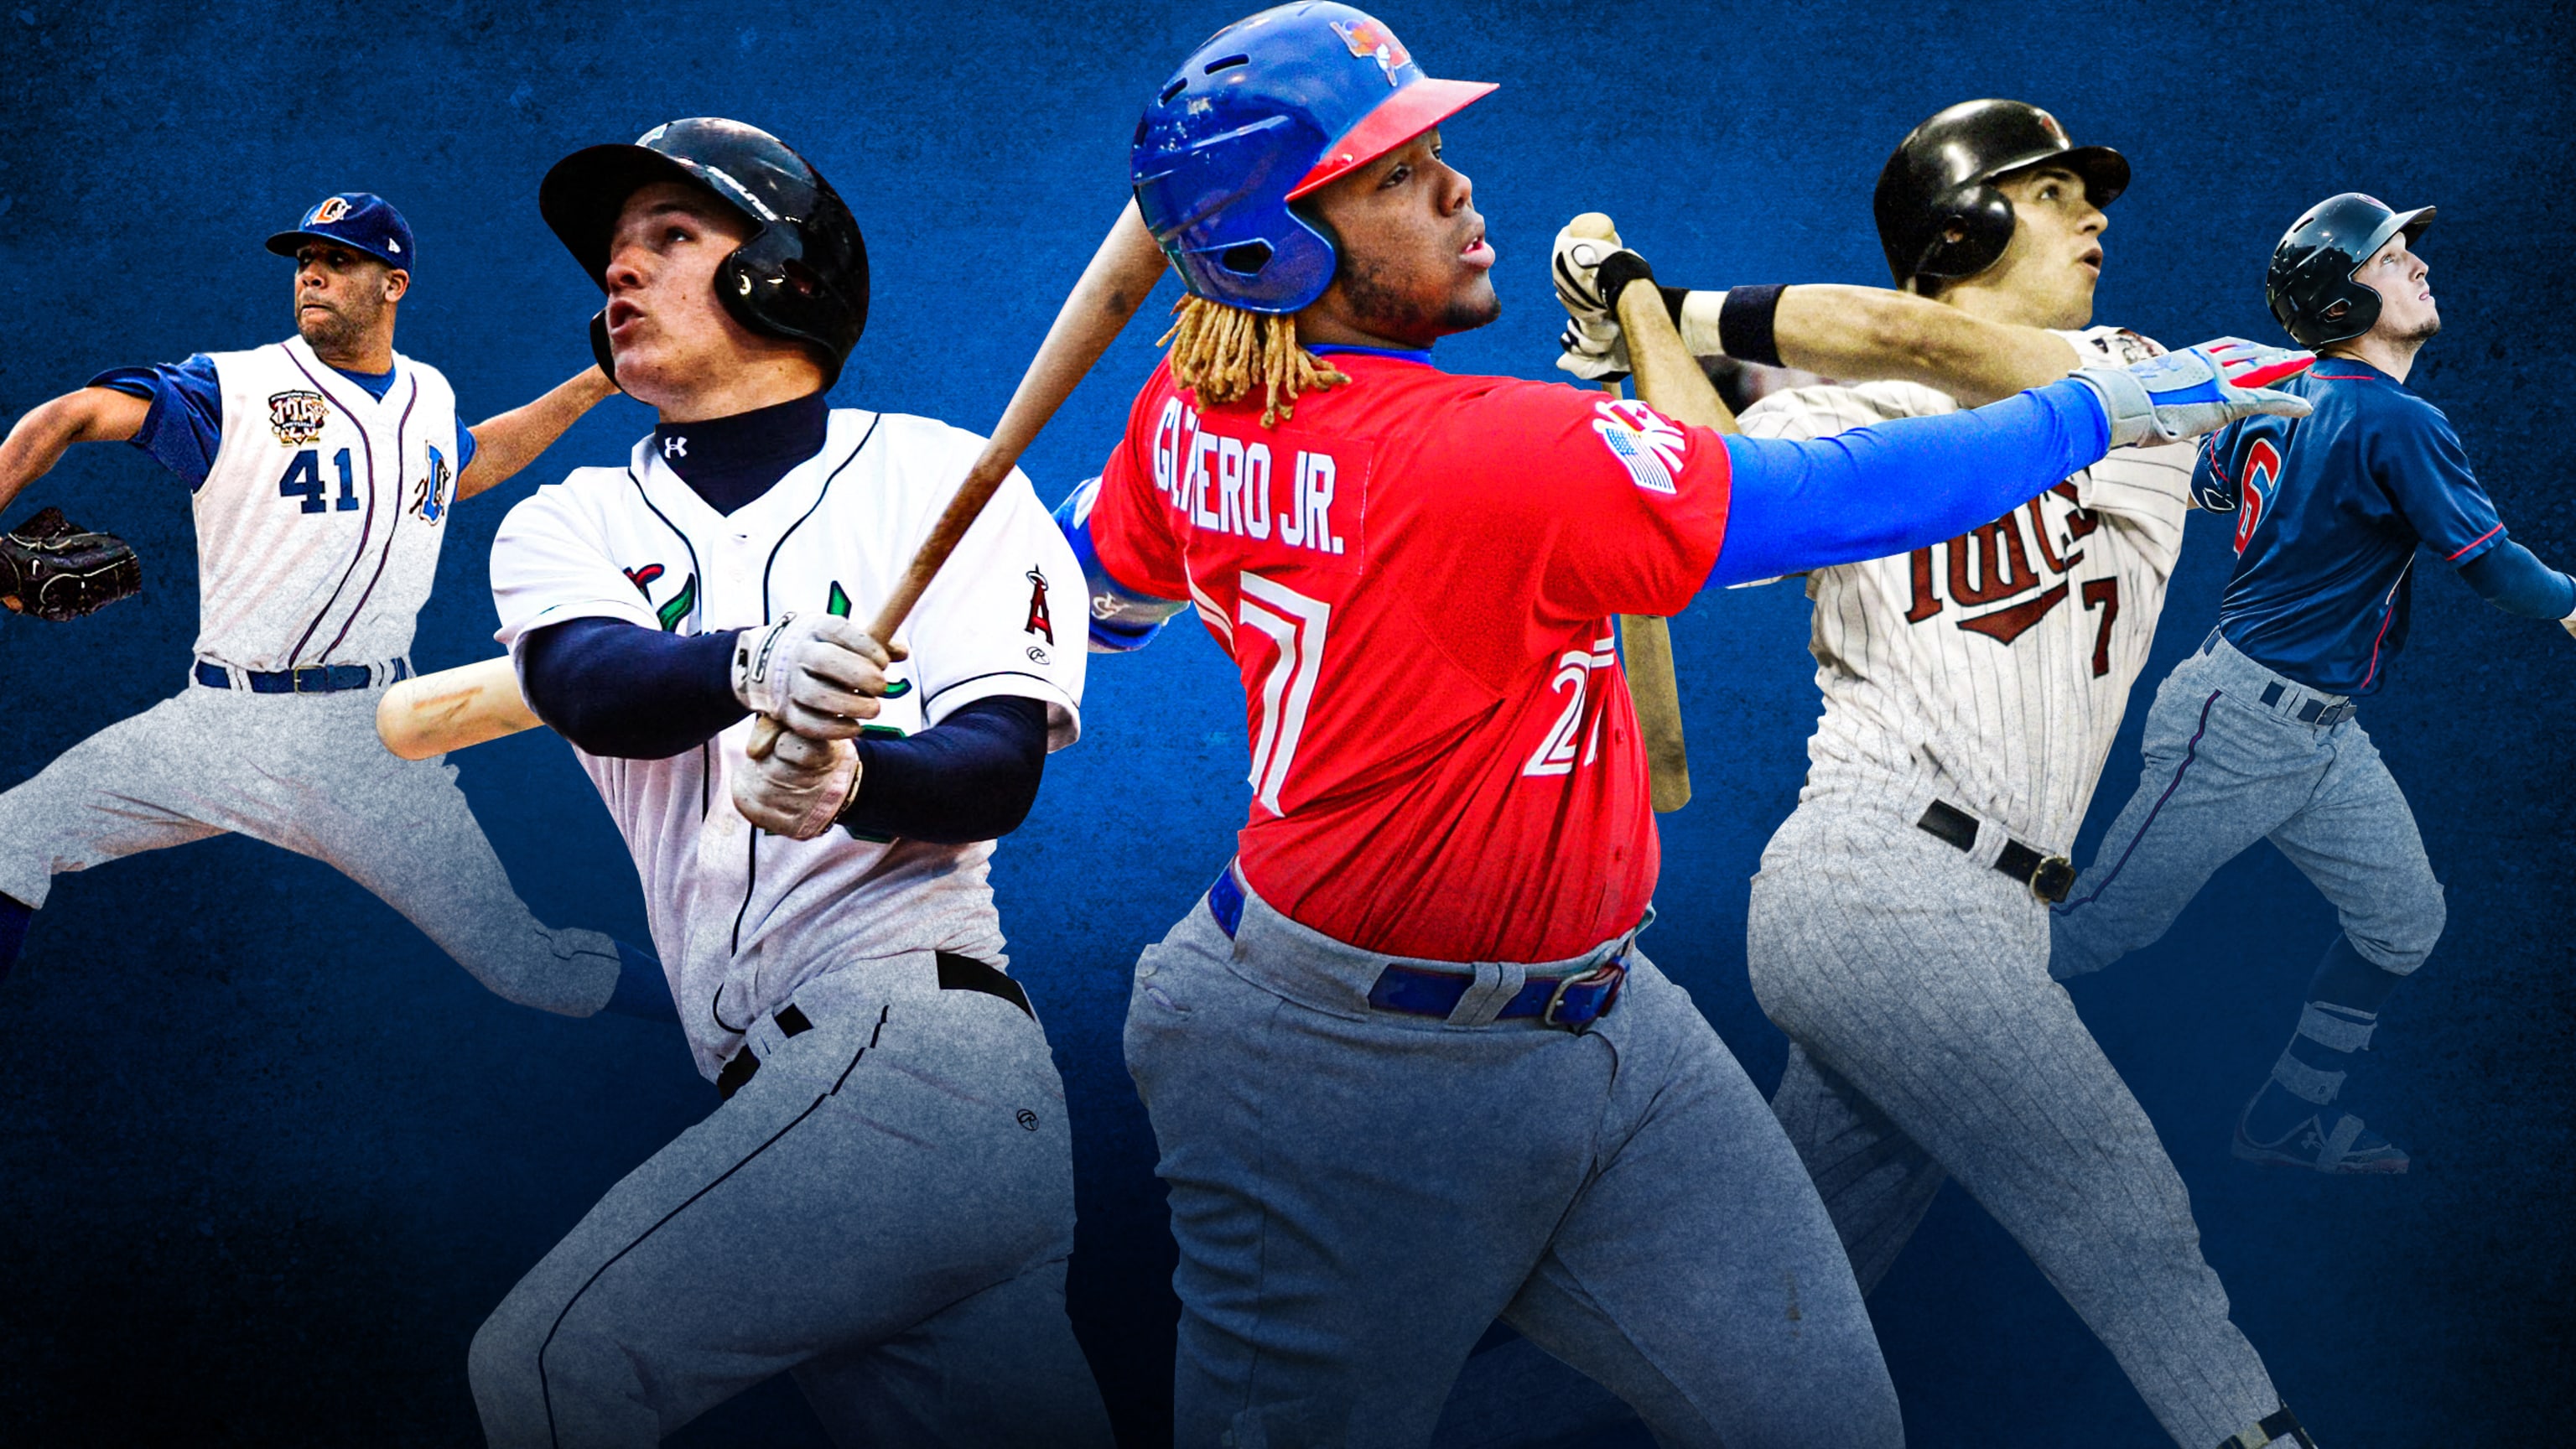 Best No. 8 prospects in MLB history